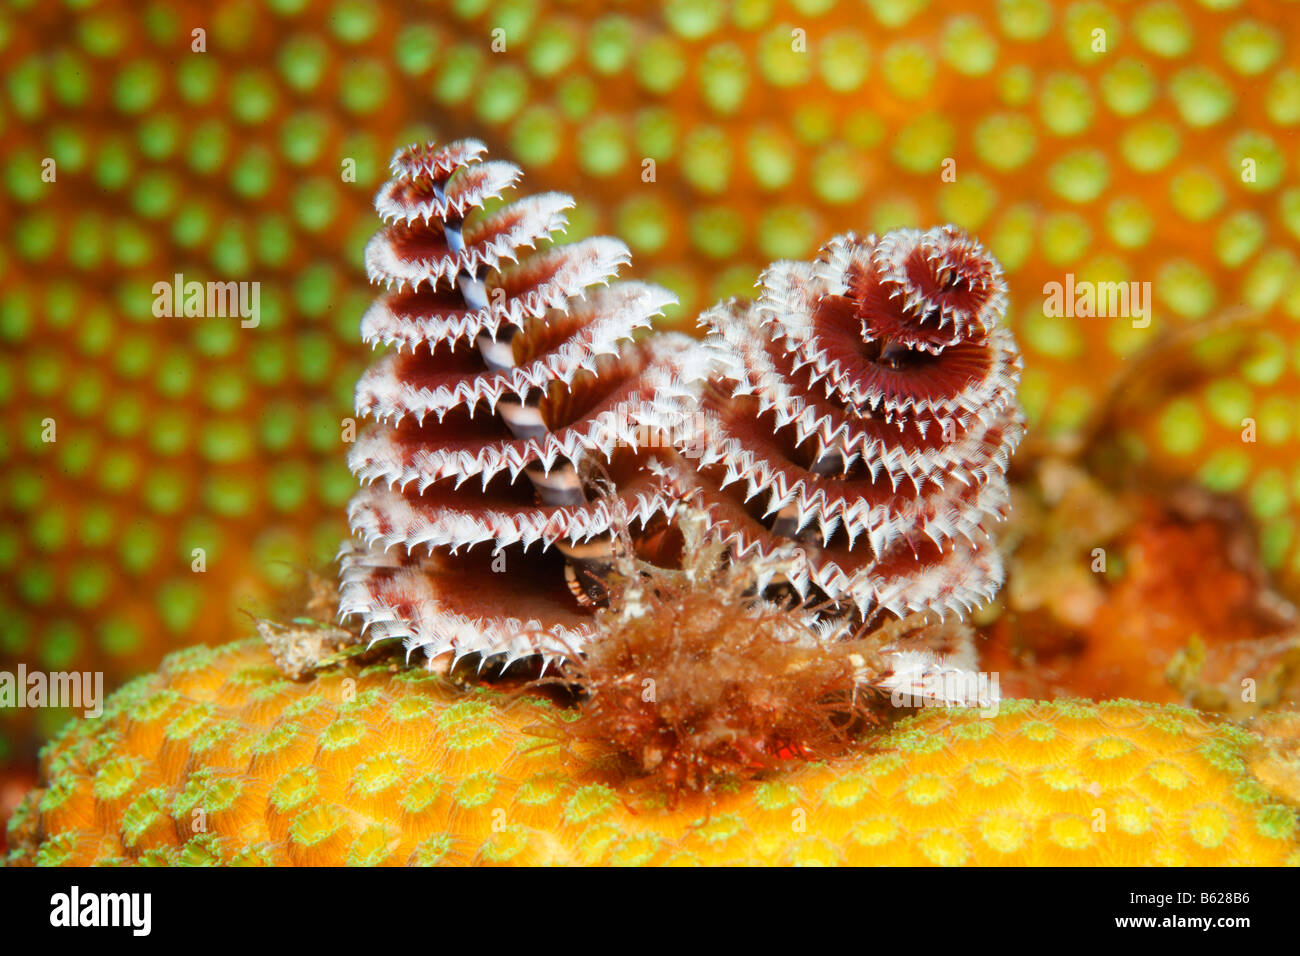 Christmas Tree Worm (Spirobranchus giganteus) settle on a stony coral, Barrier Reef, San Pedro, Ambergris Cay Island, Belize, C Stock Photo